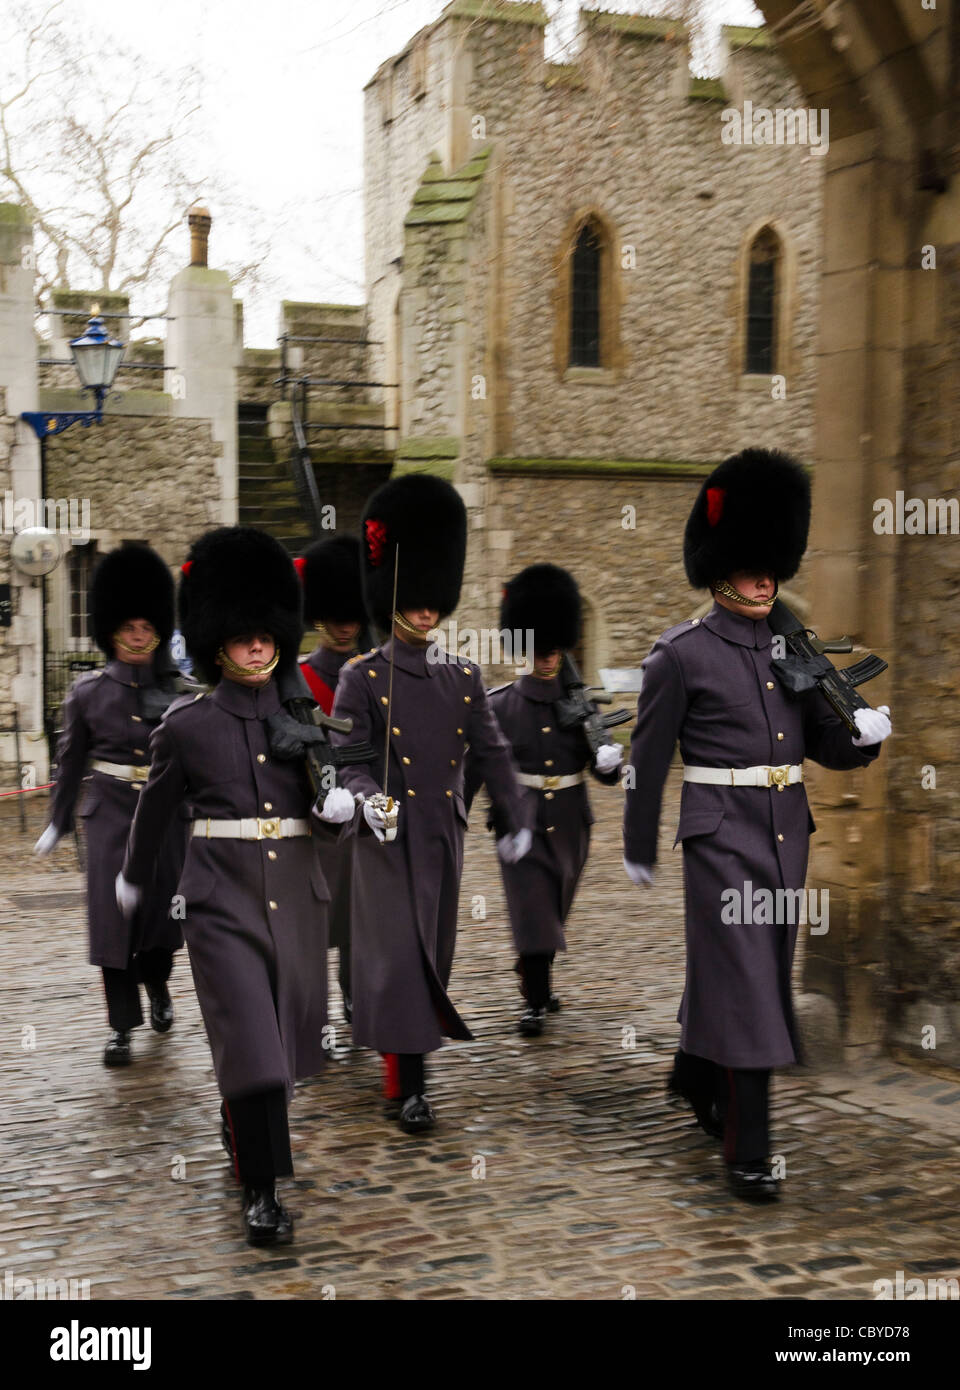 Royal guards marching Tower of London, London England Great Britain UK Stock Photo